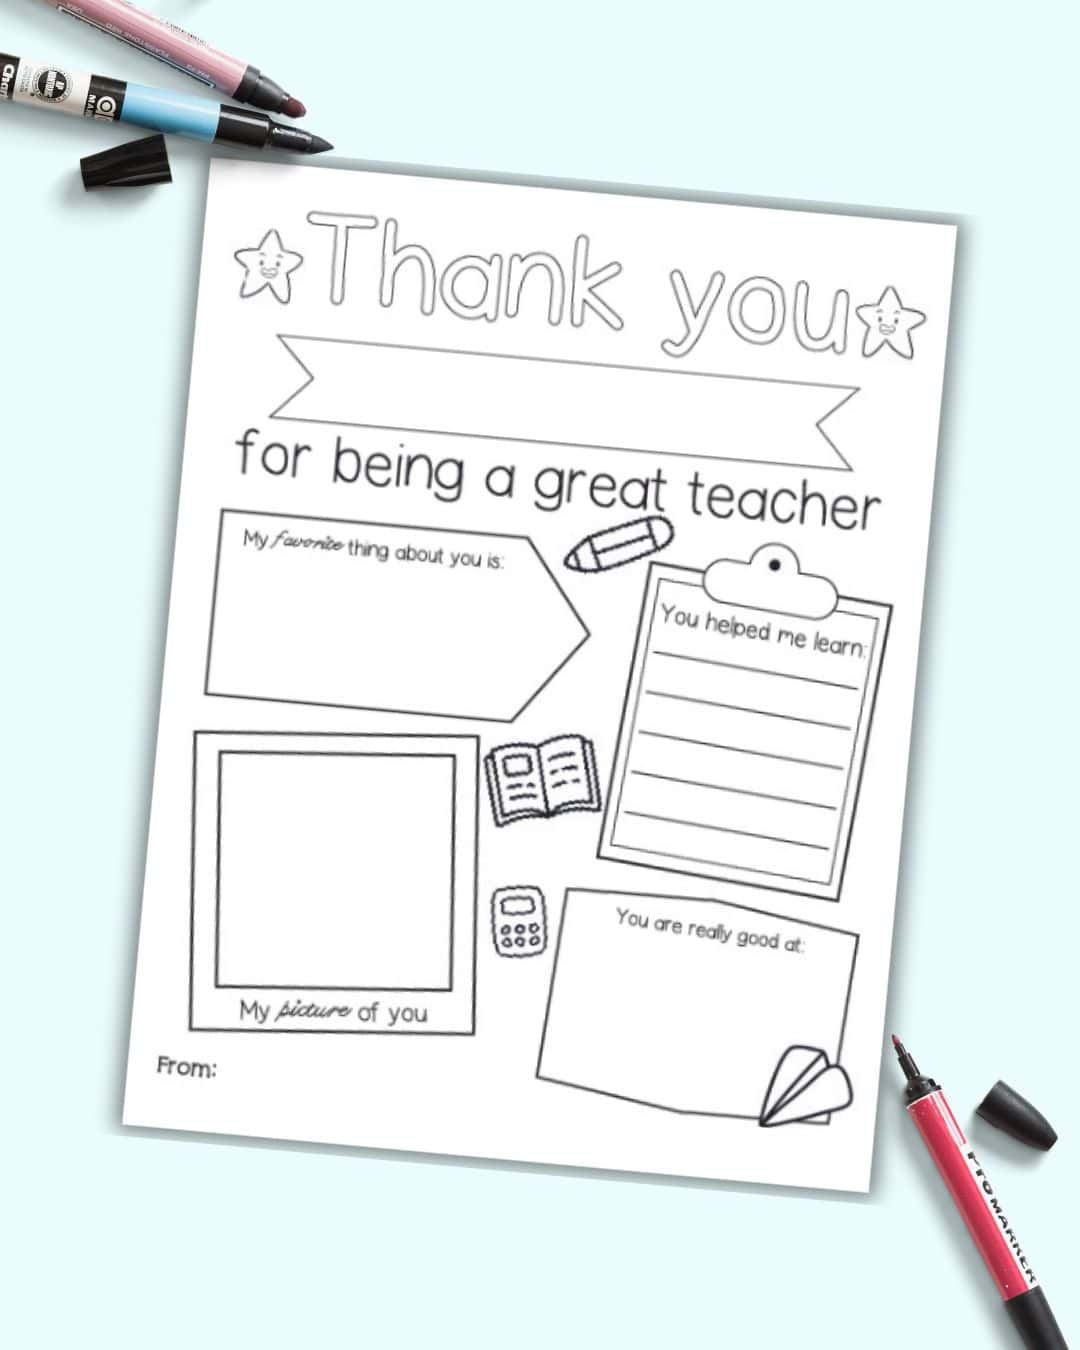 A preview of a "thank you for being a great teacher" questionnaire for teacher appreciation week